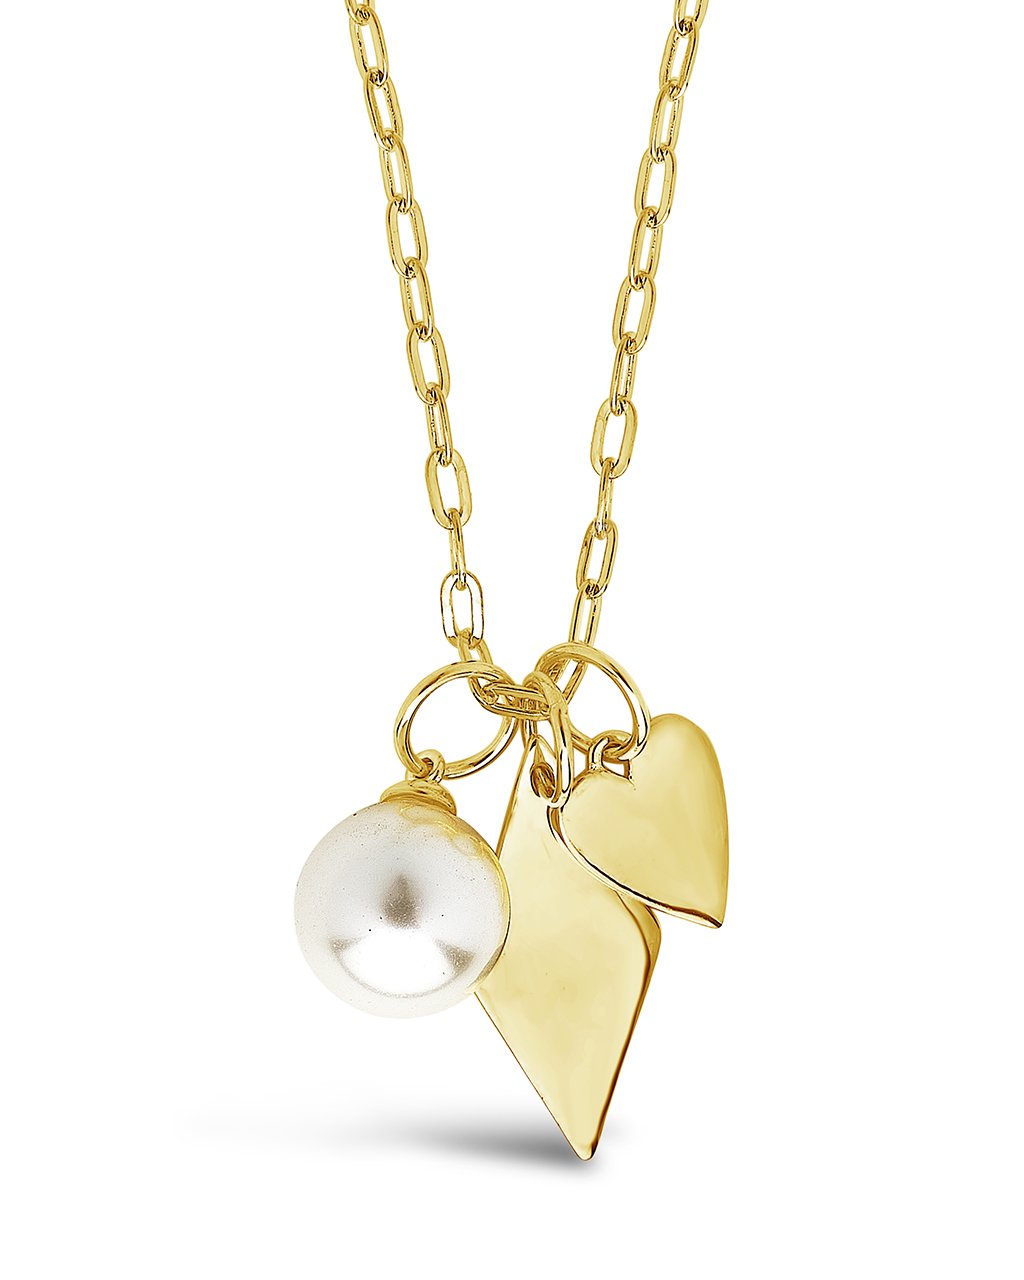 Delicate Sterling Silver Pearl & Charm Chain Necklace Necklace Sterling Forever Gold 